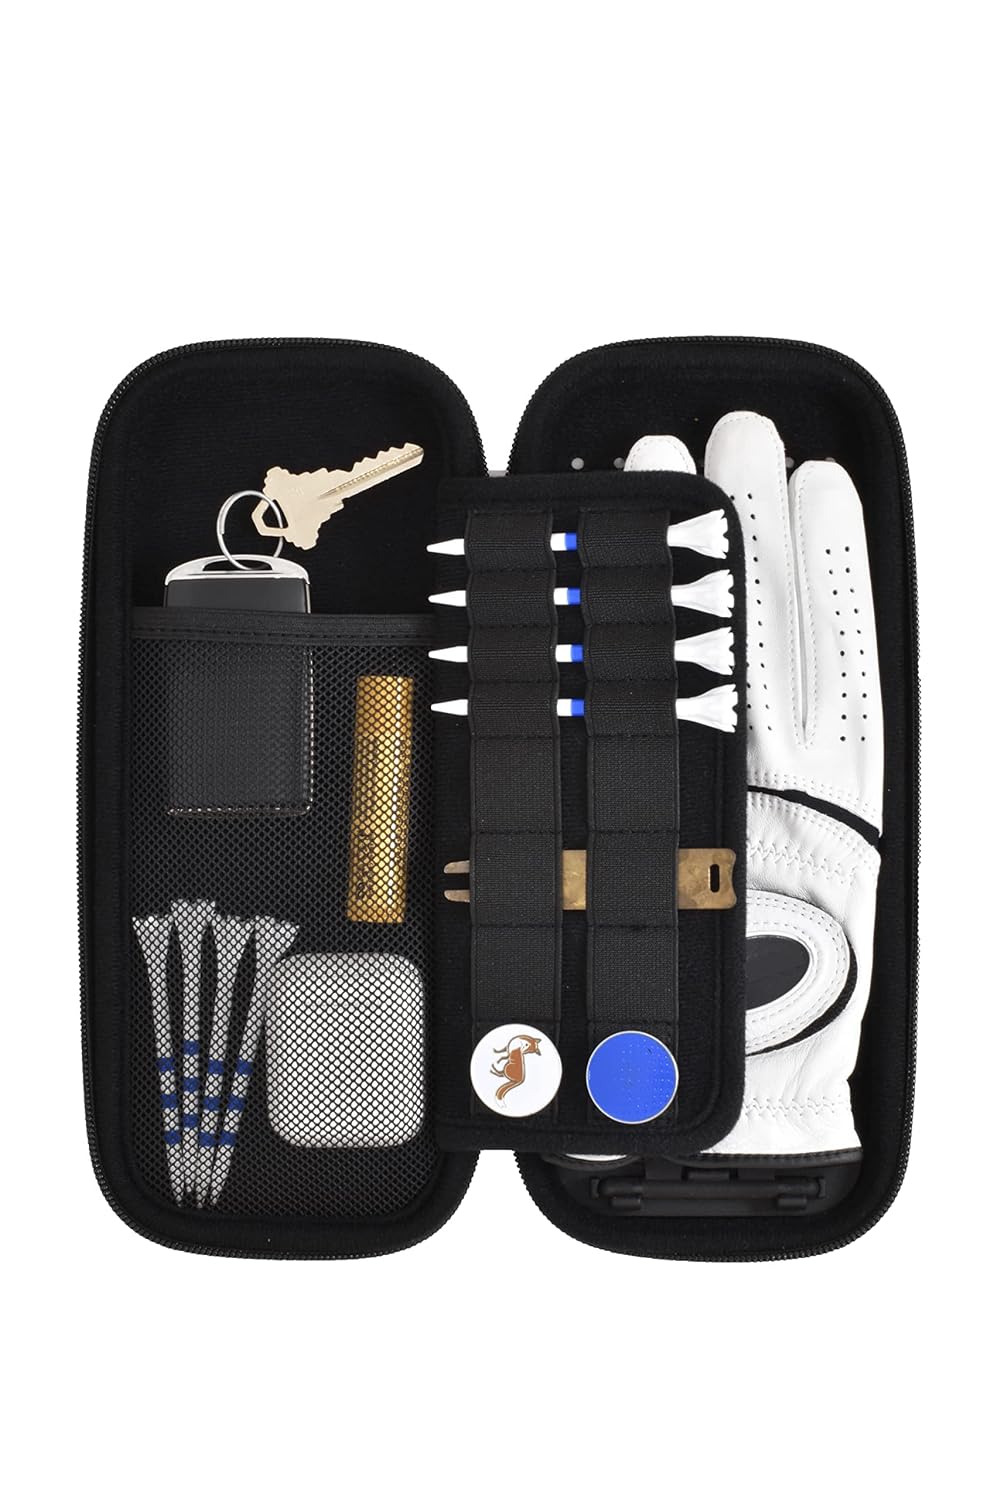 Platypus Golf Co. Caddie Case - Golf Glove Holder with Hinging Stiff Shaper - Golf Accessories for Men & Women - Hard Case Organizer with Storage Slots for Phone, Tees, Divot Tools & Ball Markers